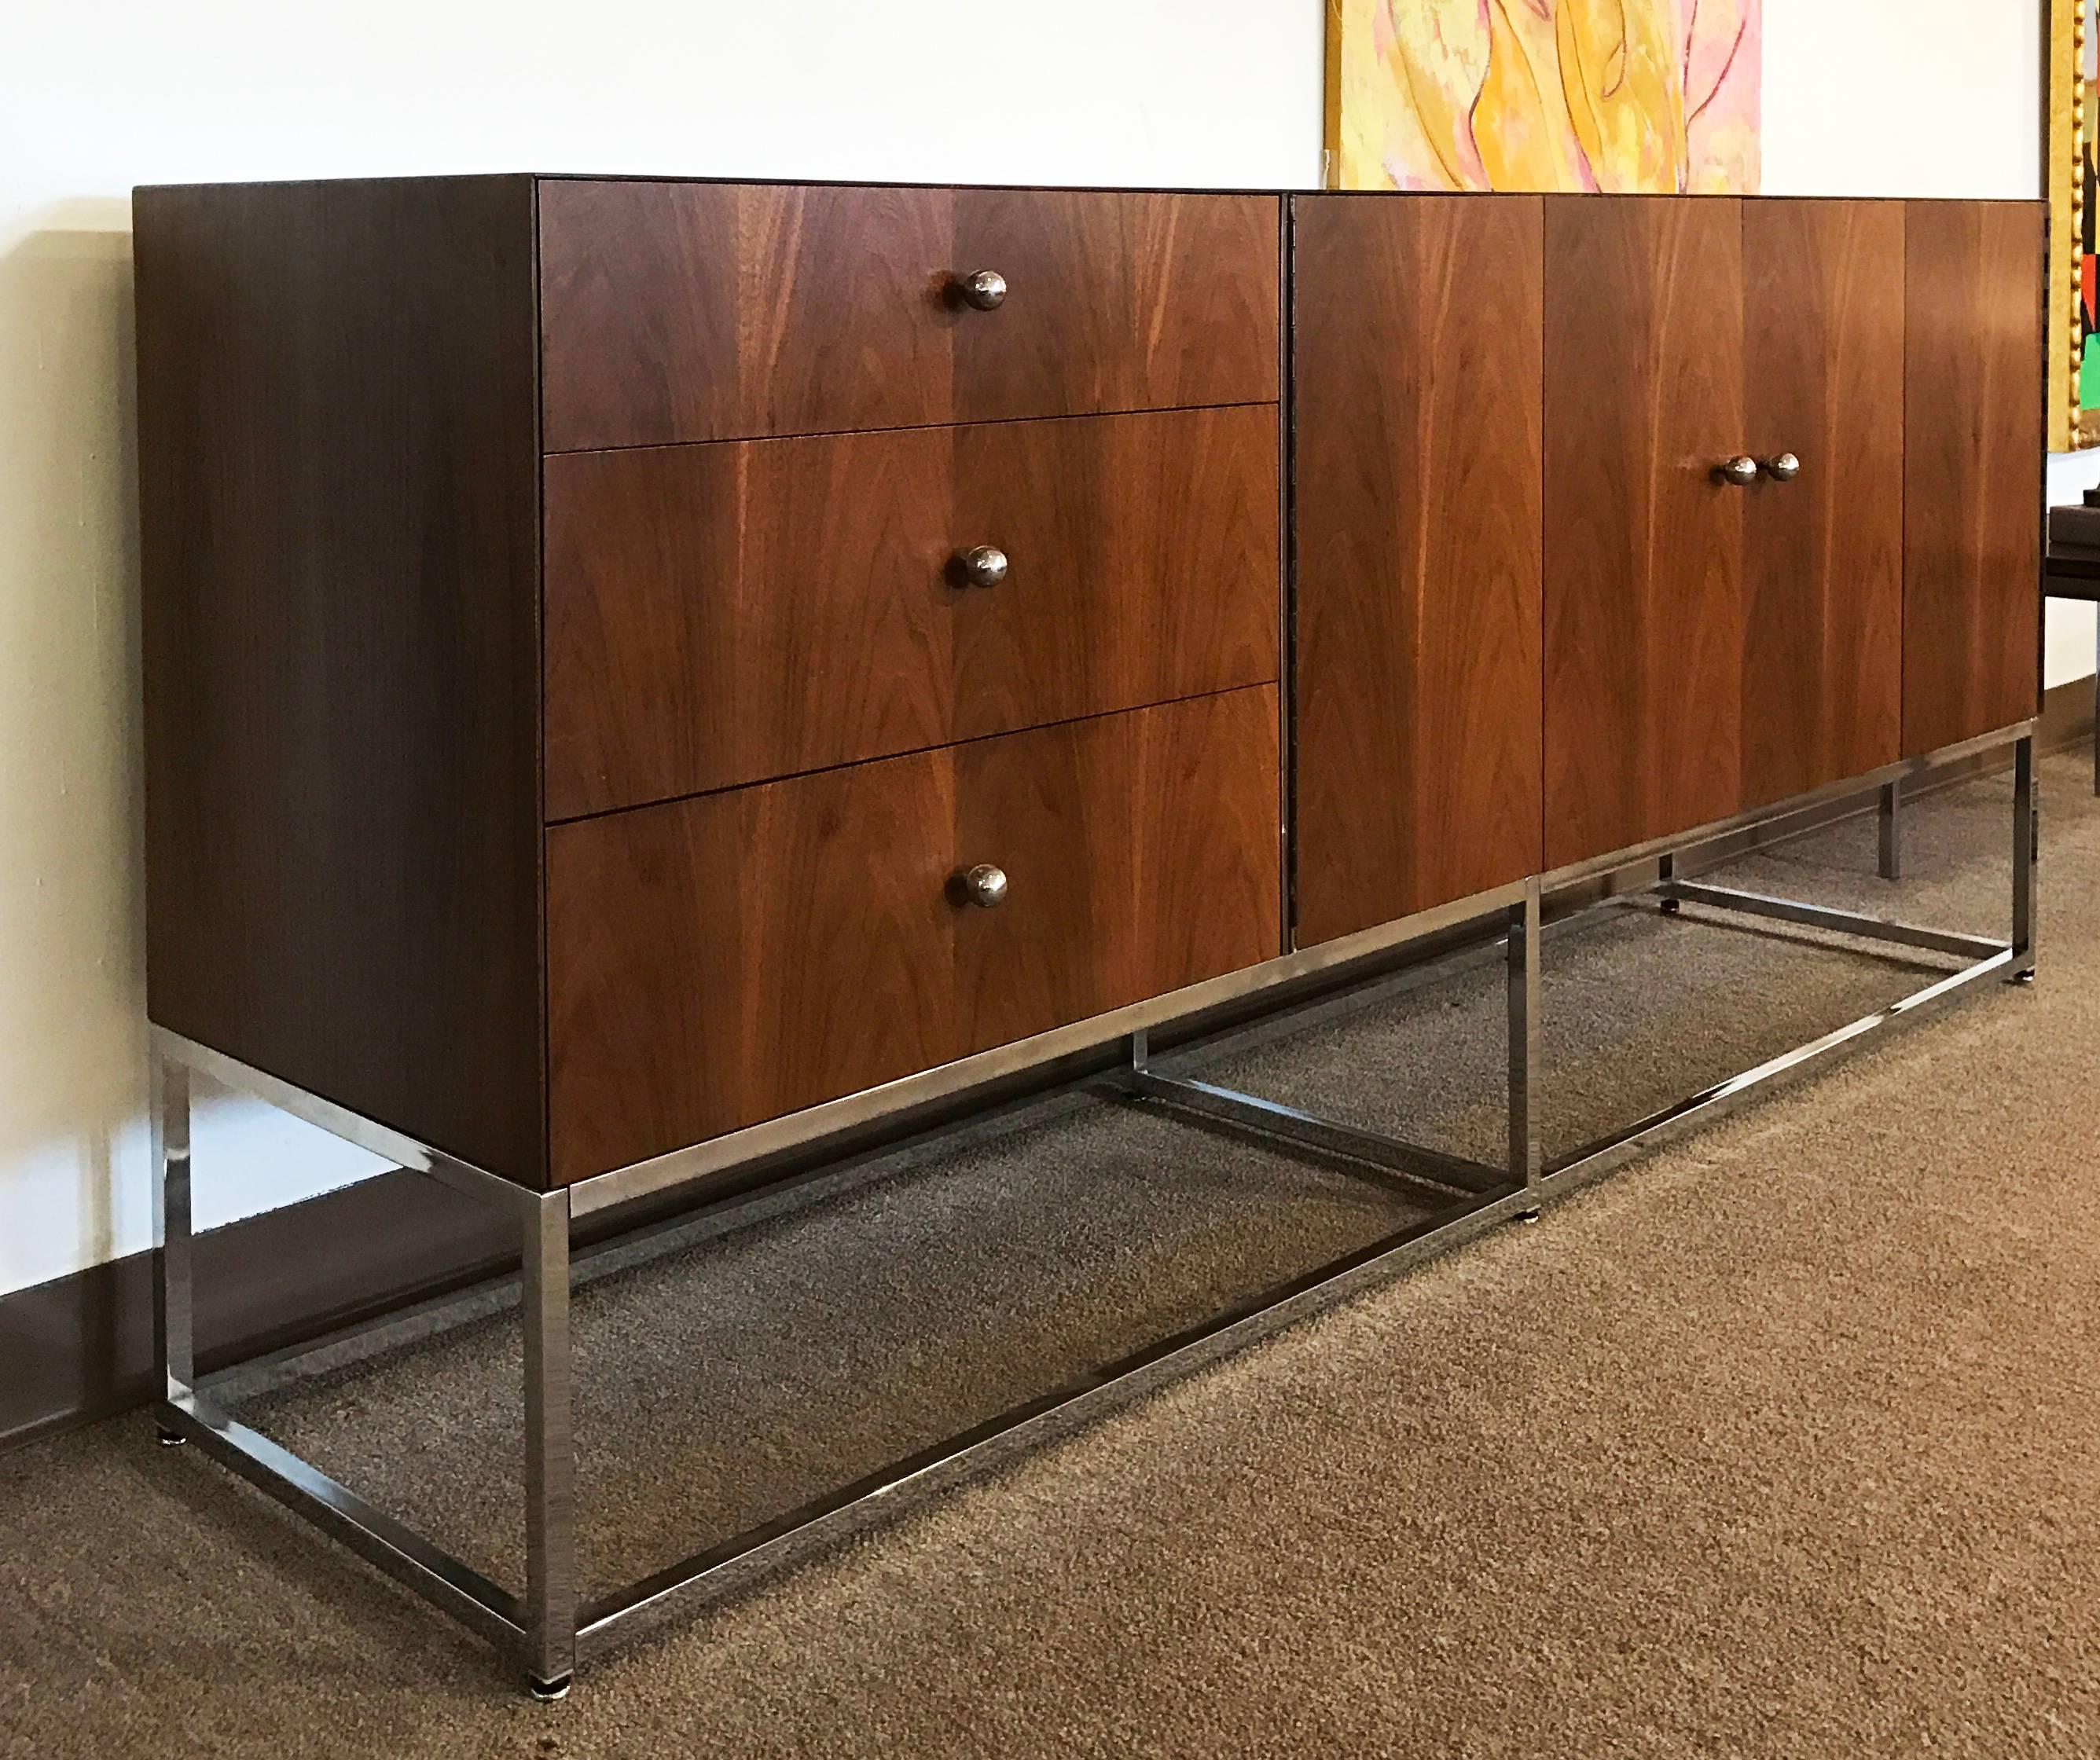 For your consideration is an absolutely gorgeous walnut wood credenza, with three drawers and two hinged doors, on a floating chrome base by Milo Baughman for Rougier. In excellent condition. The dimensions are 76